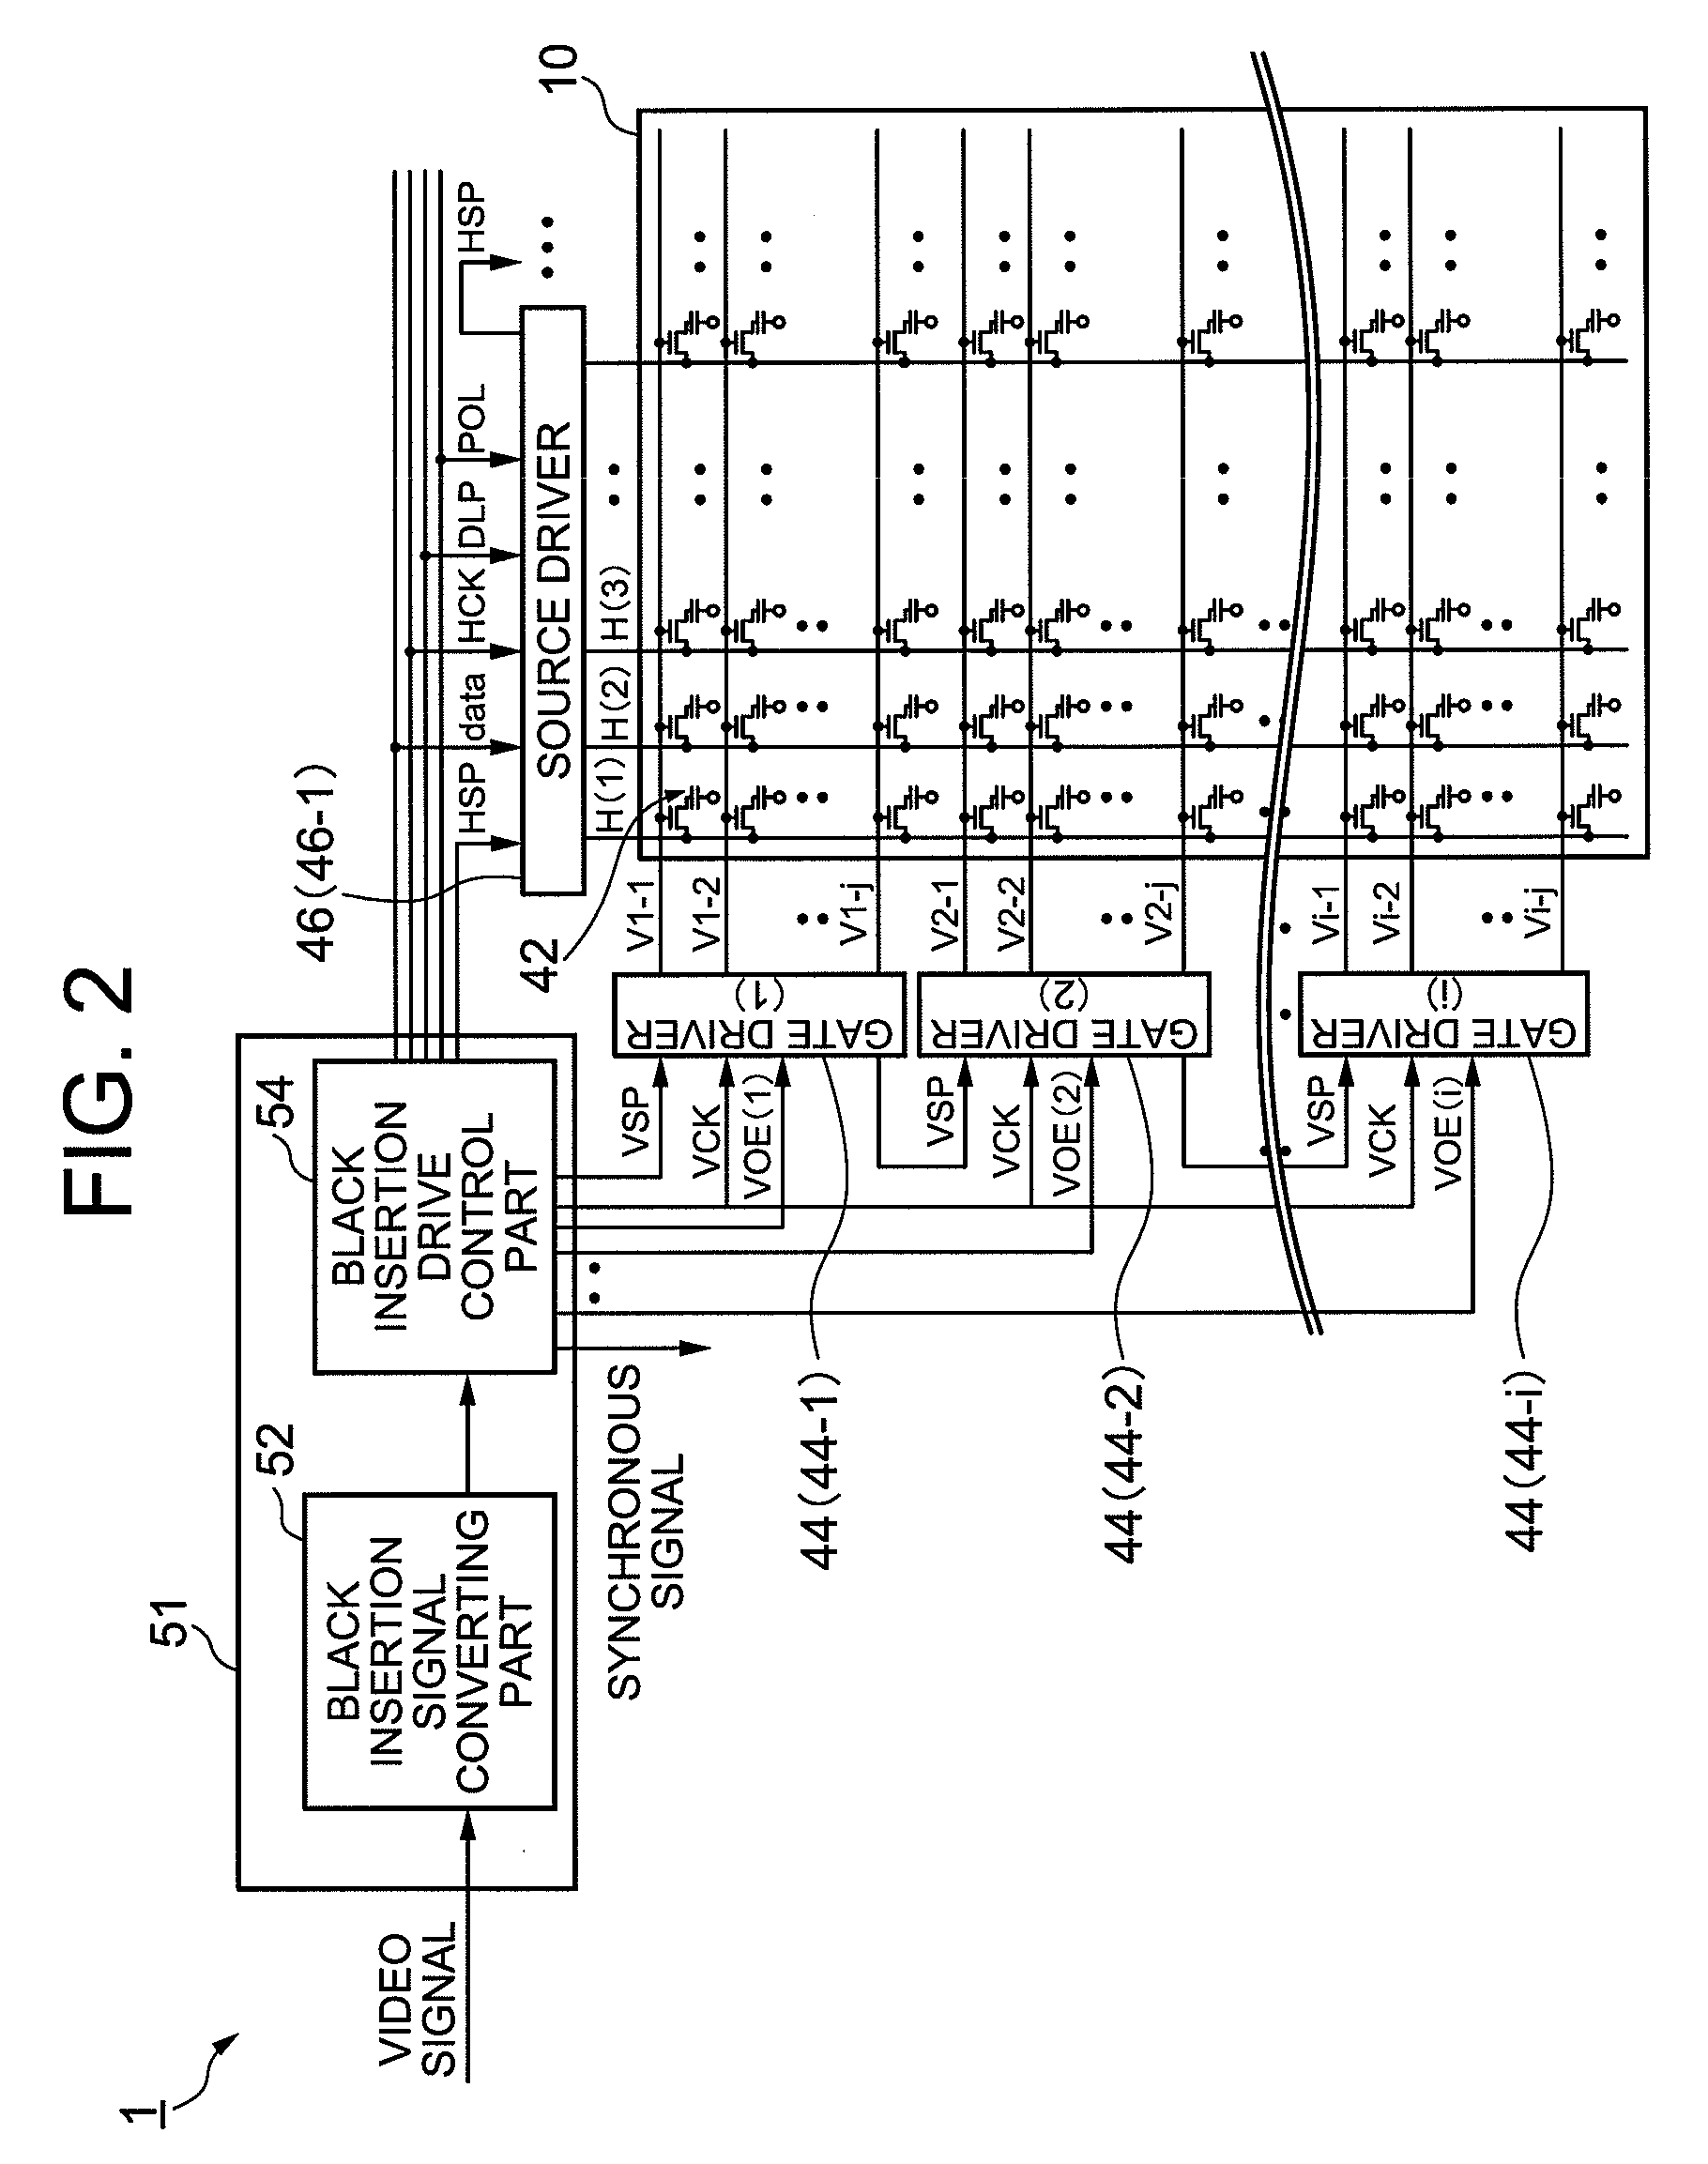 Display panel control device, liquid crystal display device, electronic apparatus, and display panel drive control device